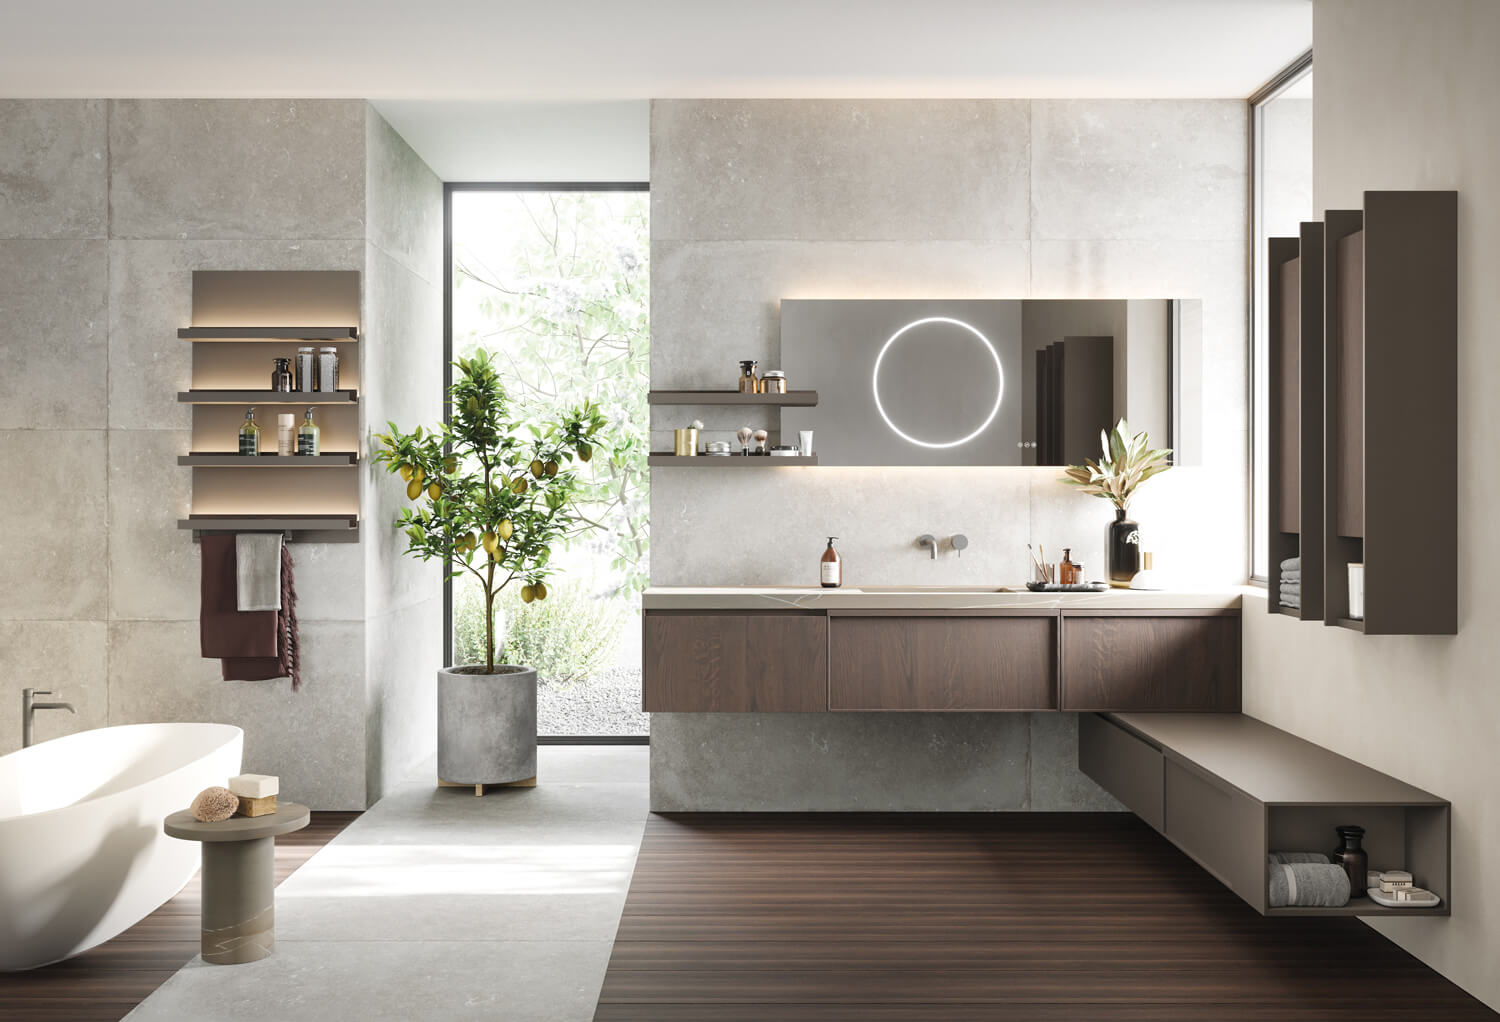 D’ART bath alternating flat and framed vanities. Rovere Tasso wood veneer and Lava matte lacquer. Washbasin top in Pietra Piasentina Grigio Naturale ceramic, a material resistant to shocks, scratches, acids, water and oil infiltrations.  